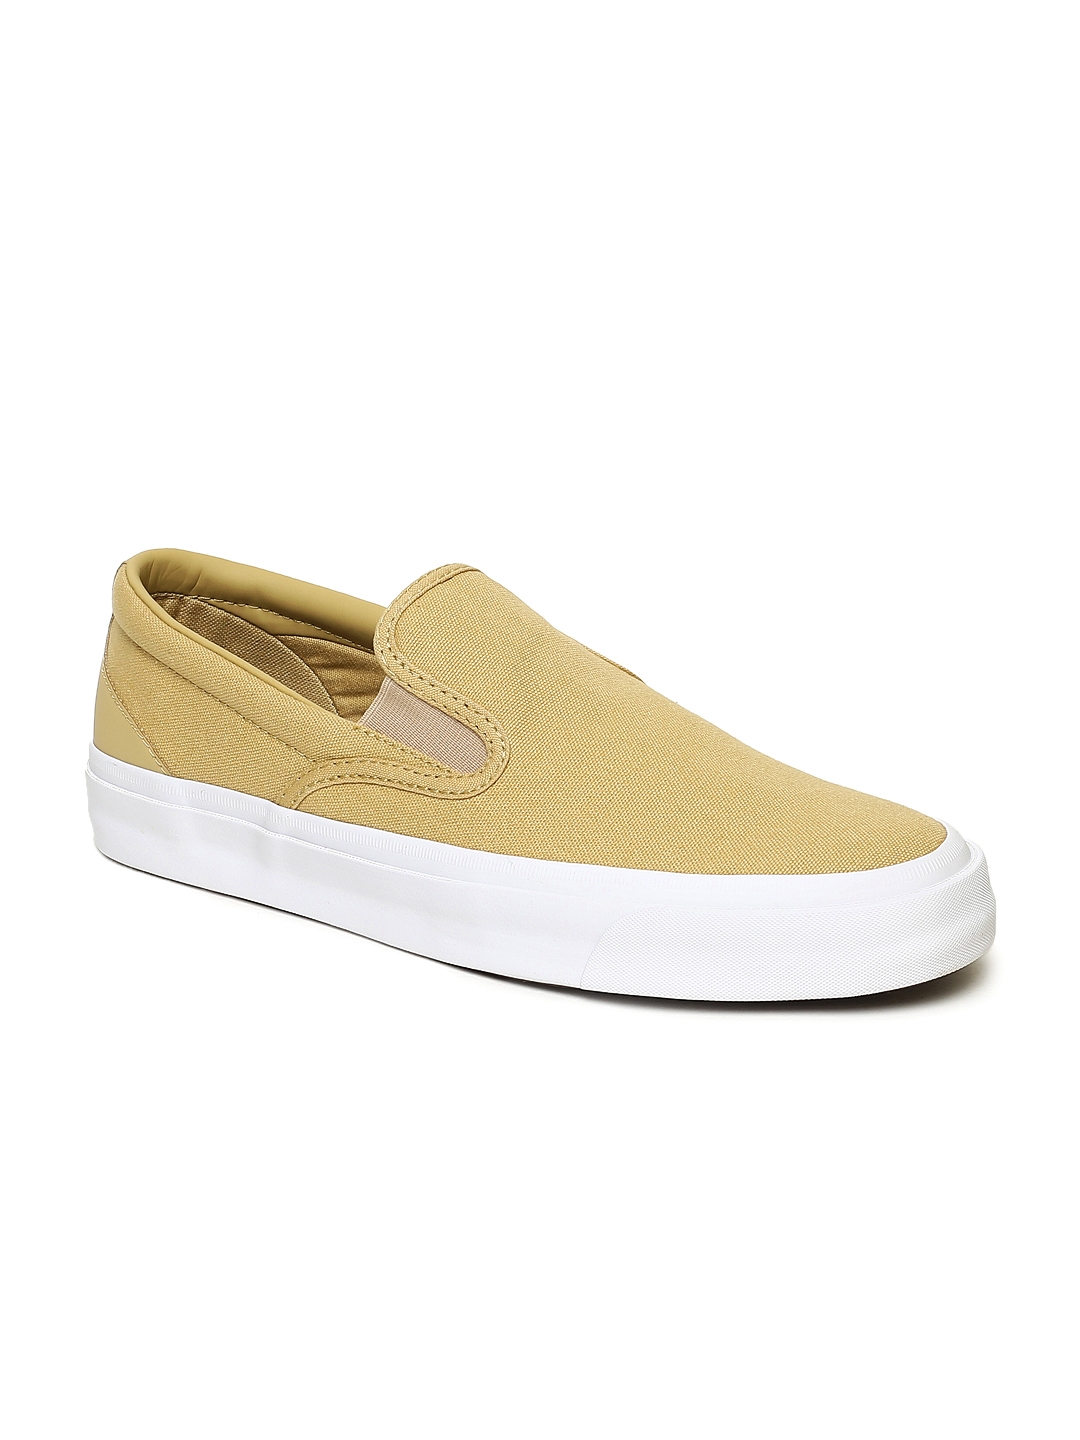 Buy Converse Sport Utility SLS Unisex Camel Brown Slip On Sneakers - Casual  Shoes for Unisex 8552601 | Myntra